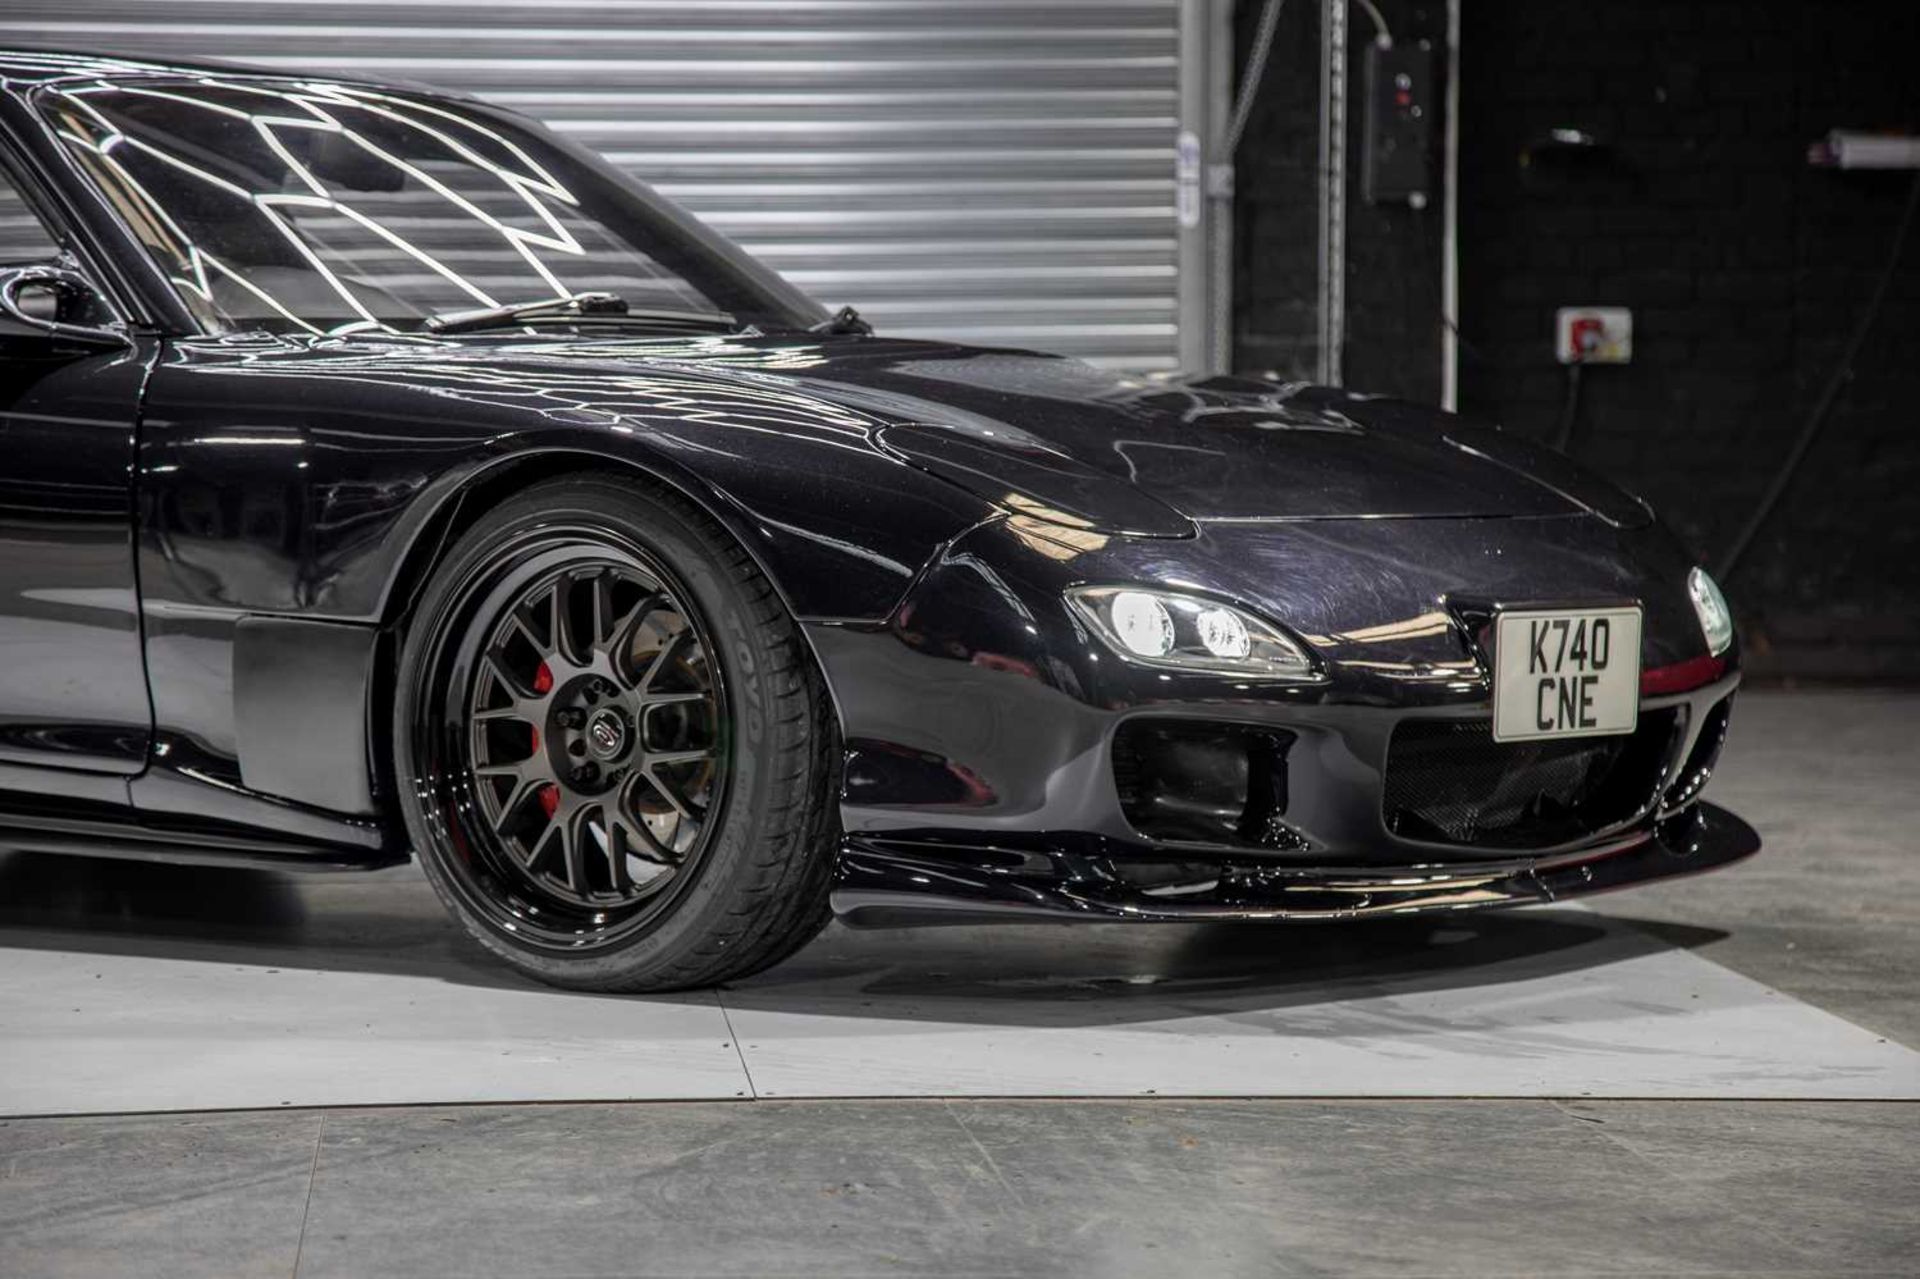 1993 Mazda RX7 FD Efini UK registered since 2003 and the subject of a major restoration and upgrade  - Image 66 of 108